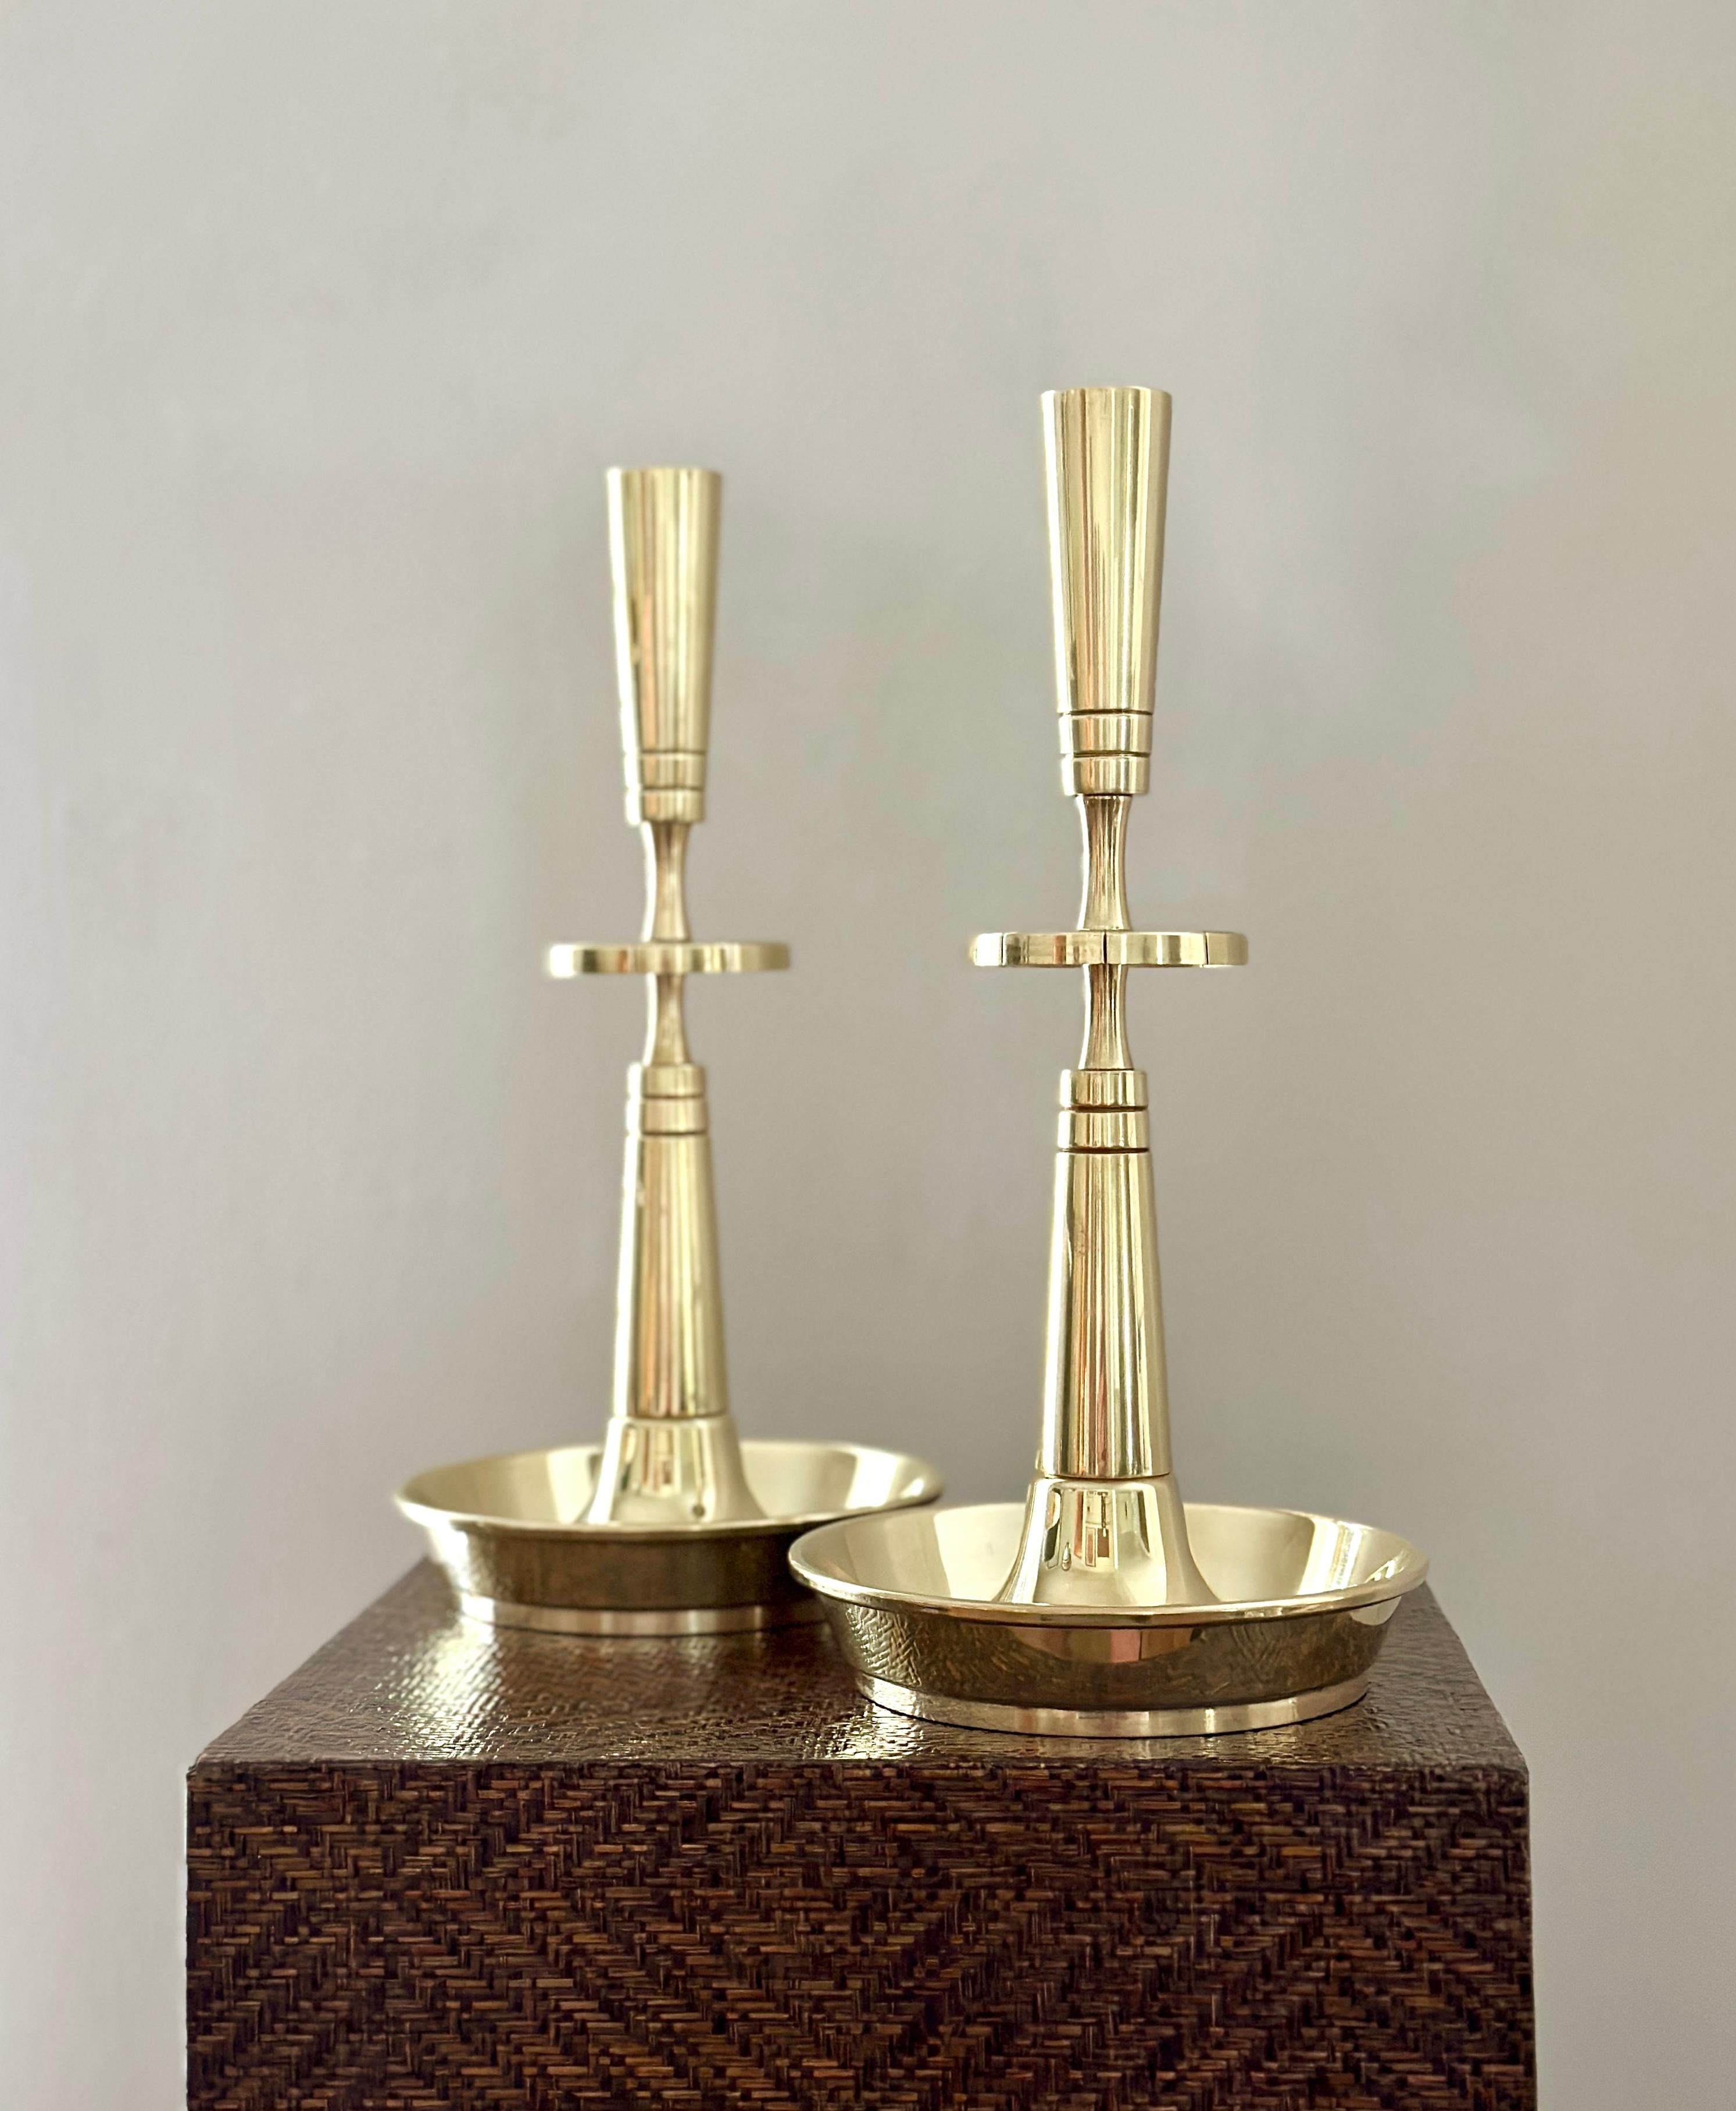 DESCRIPTION

A pair of solid brass candlesticks designed by Tommi Parzinger for Dorlyn Silversmiths. The candlesticks stand approximately 10 5/8 inches tall and the base is 5 1/2 inches at the top of the lip of the base. One candlesticks is embossed